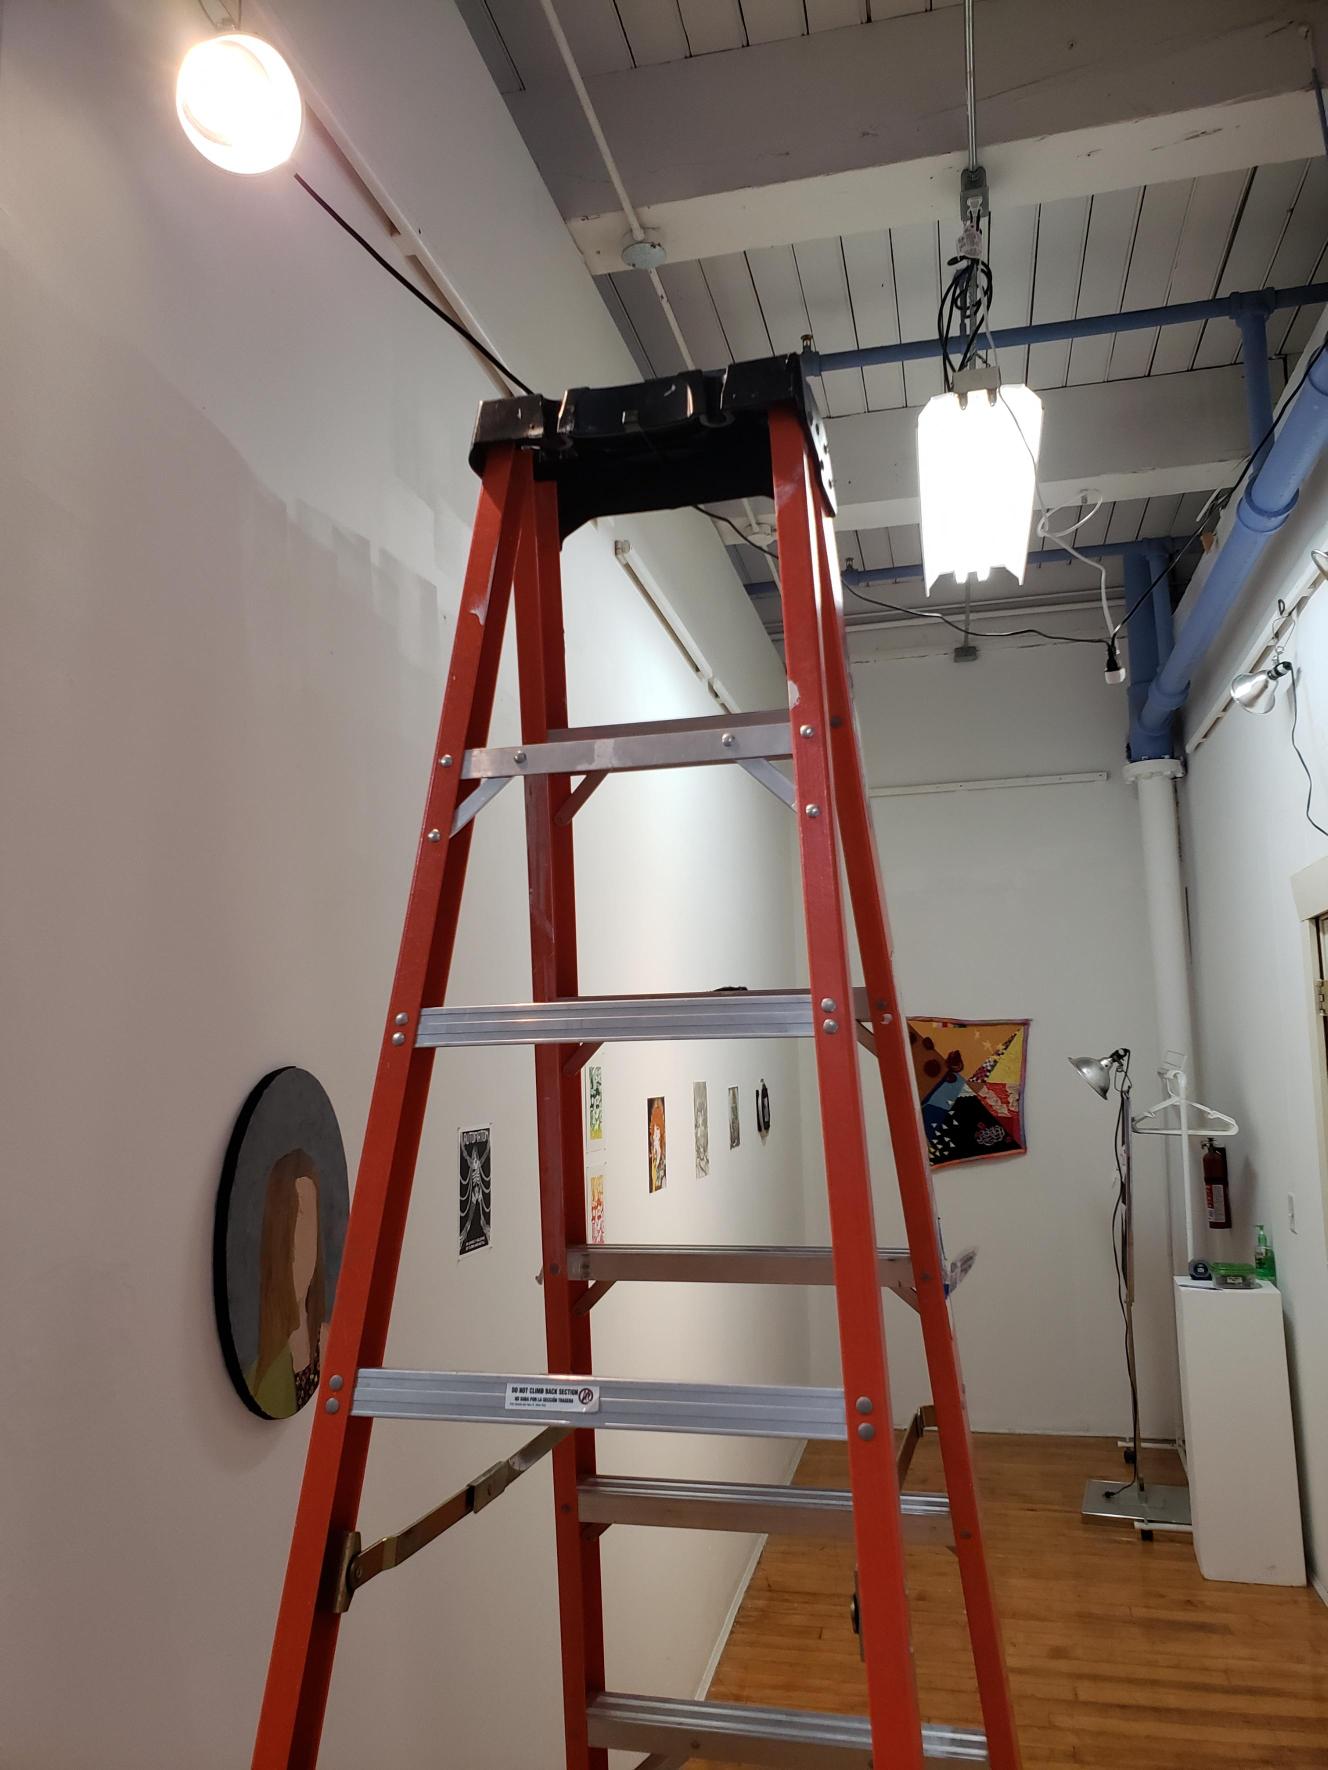 A ladder set up in the Kalamazoo College Community Studio, in front of artwork in the Department Show